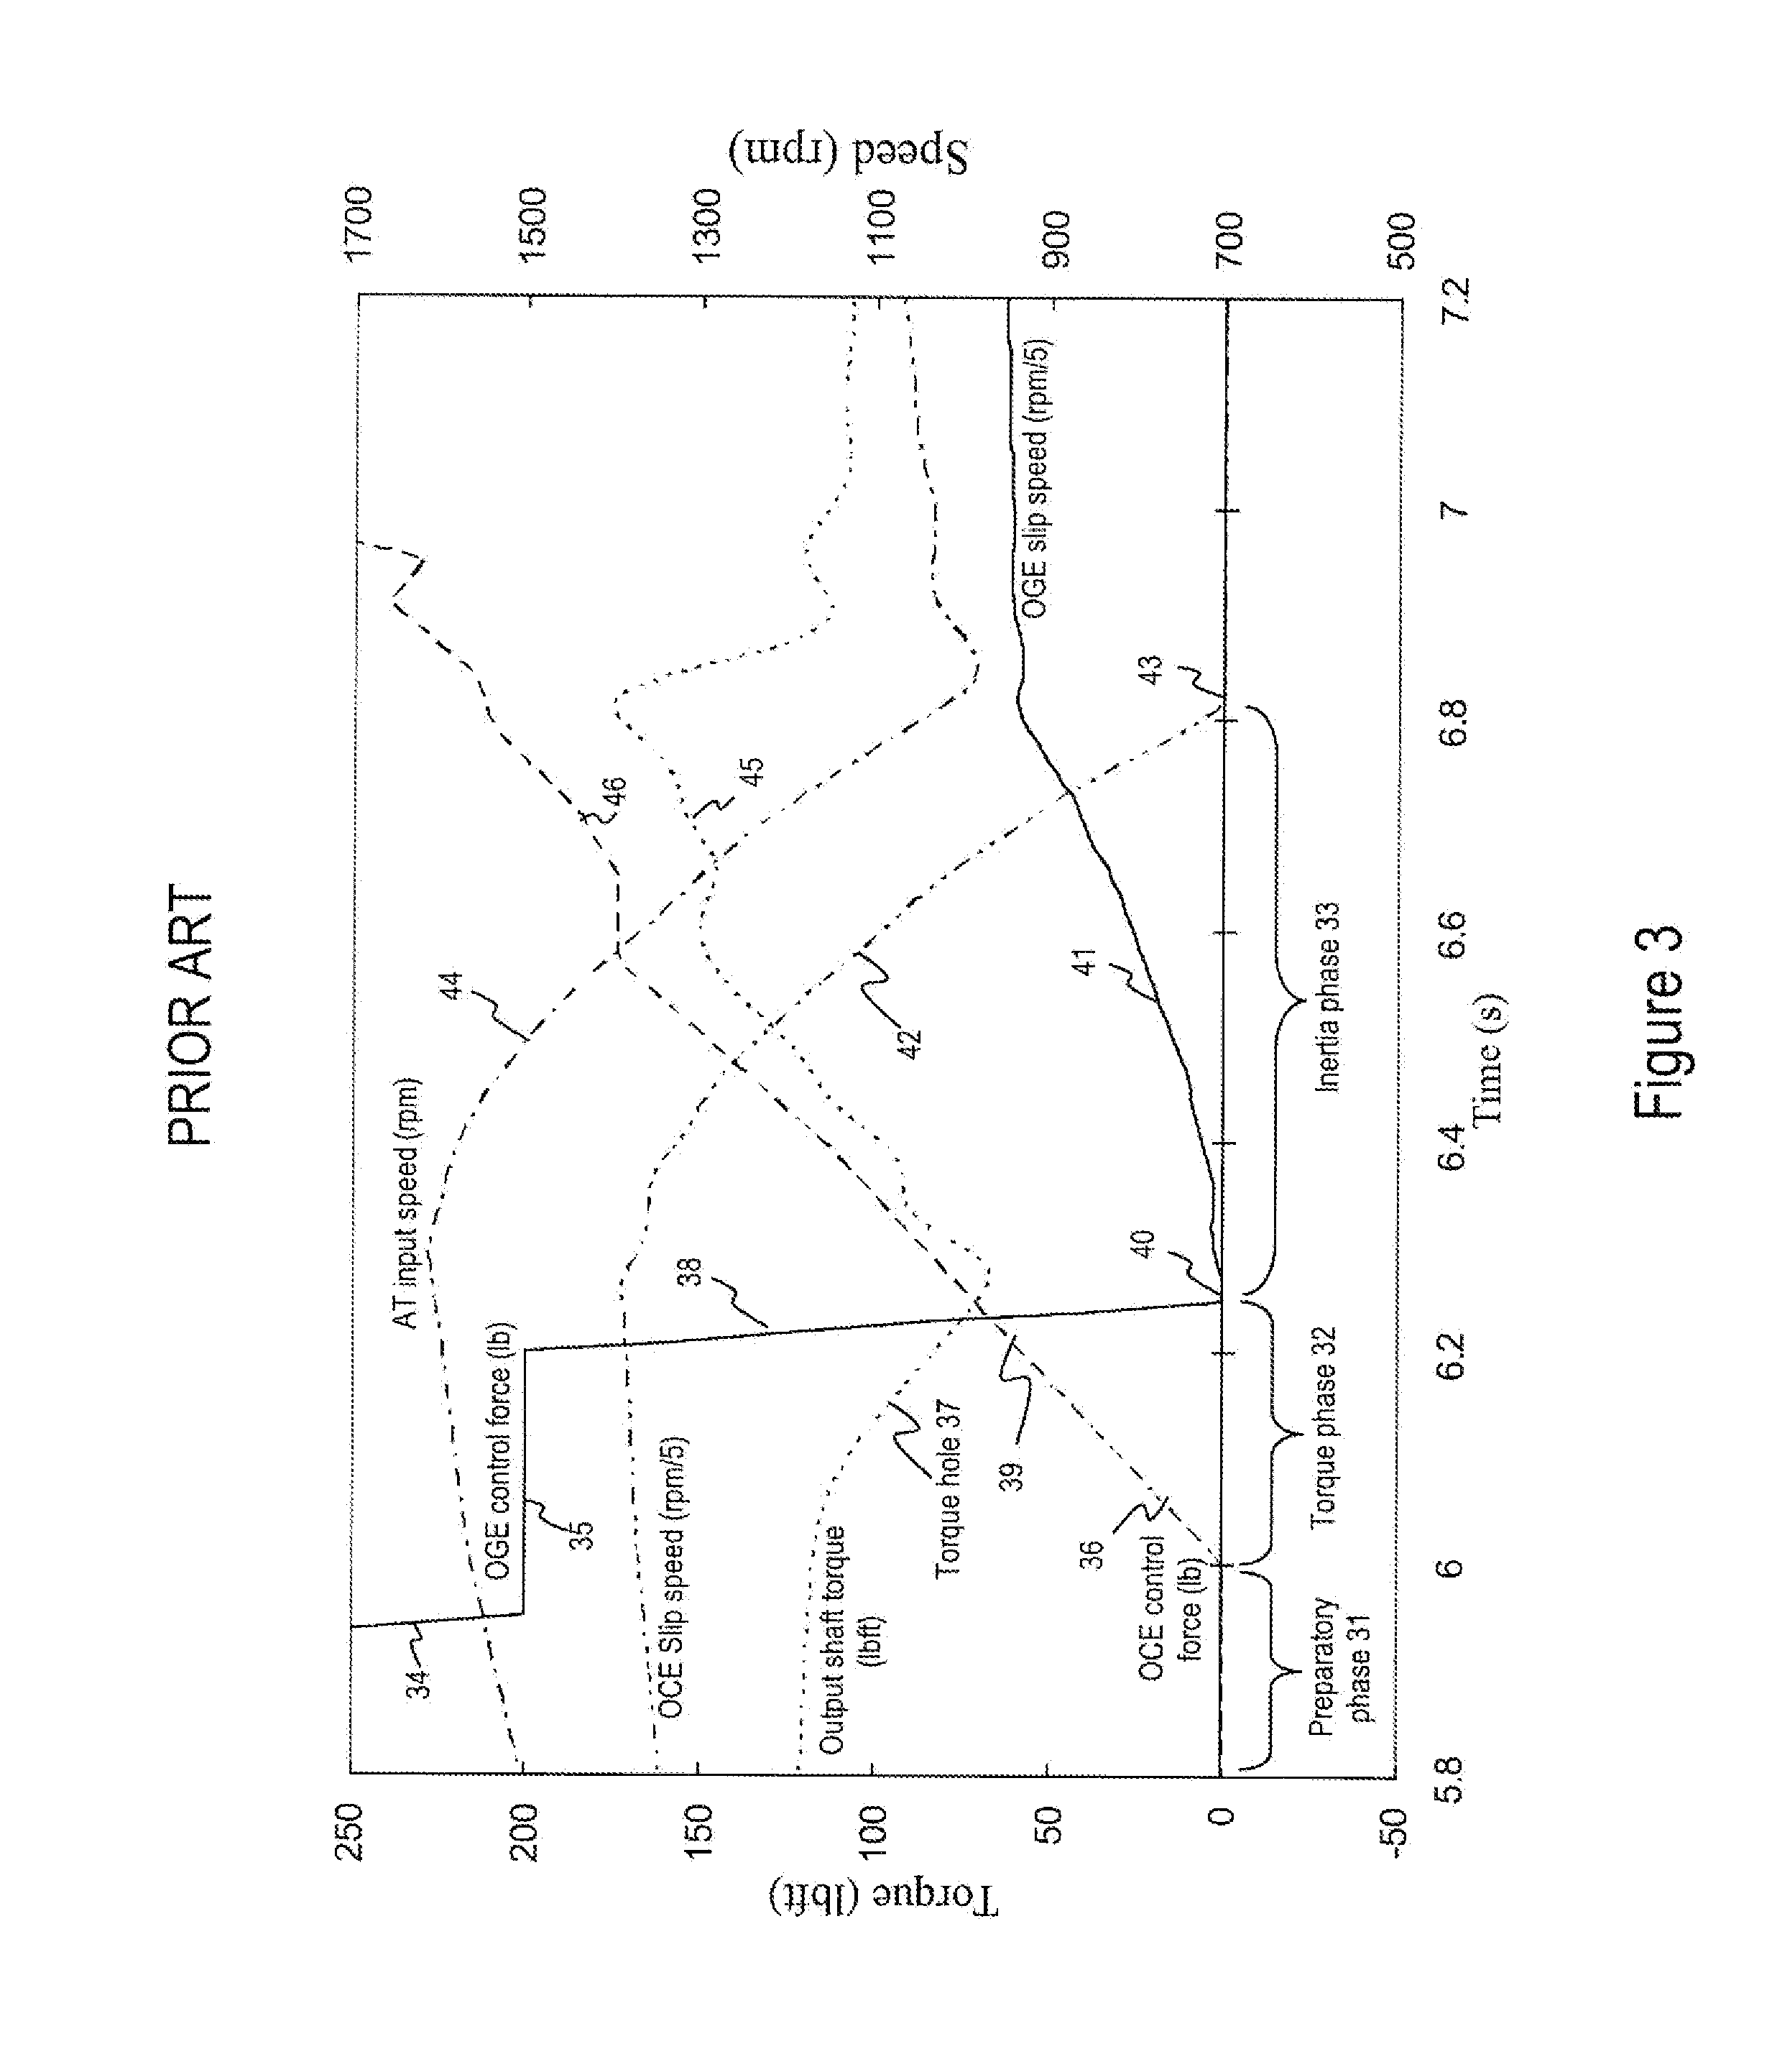 Closed-Loop Torque Phase Control for Shifting Automatic Transmission Gear Ratios Based on Friction Element Load Estimation